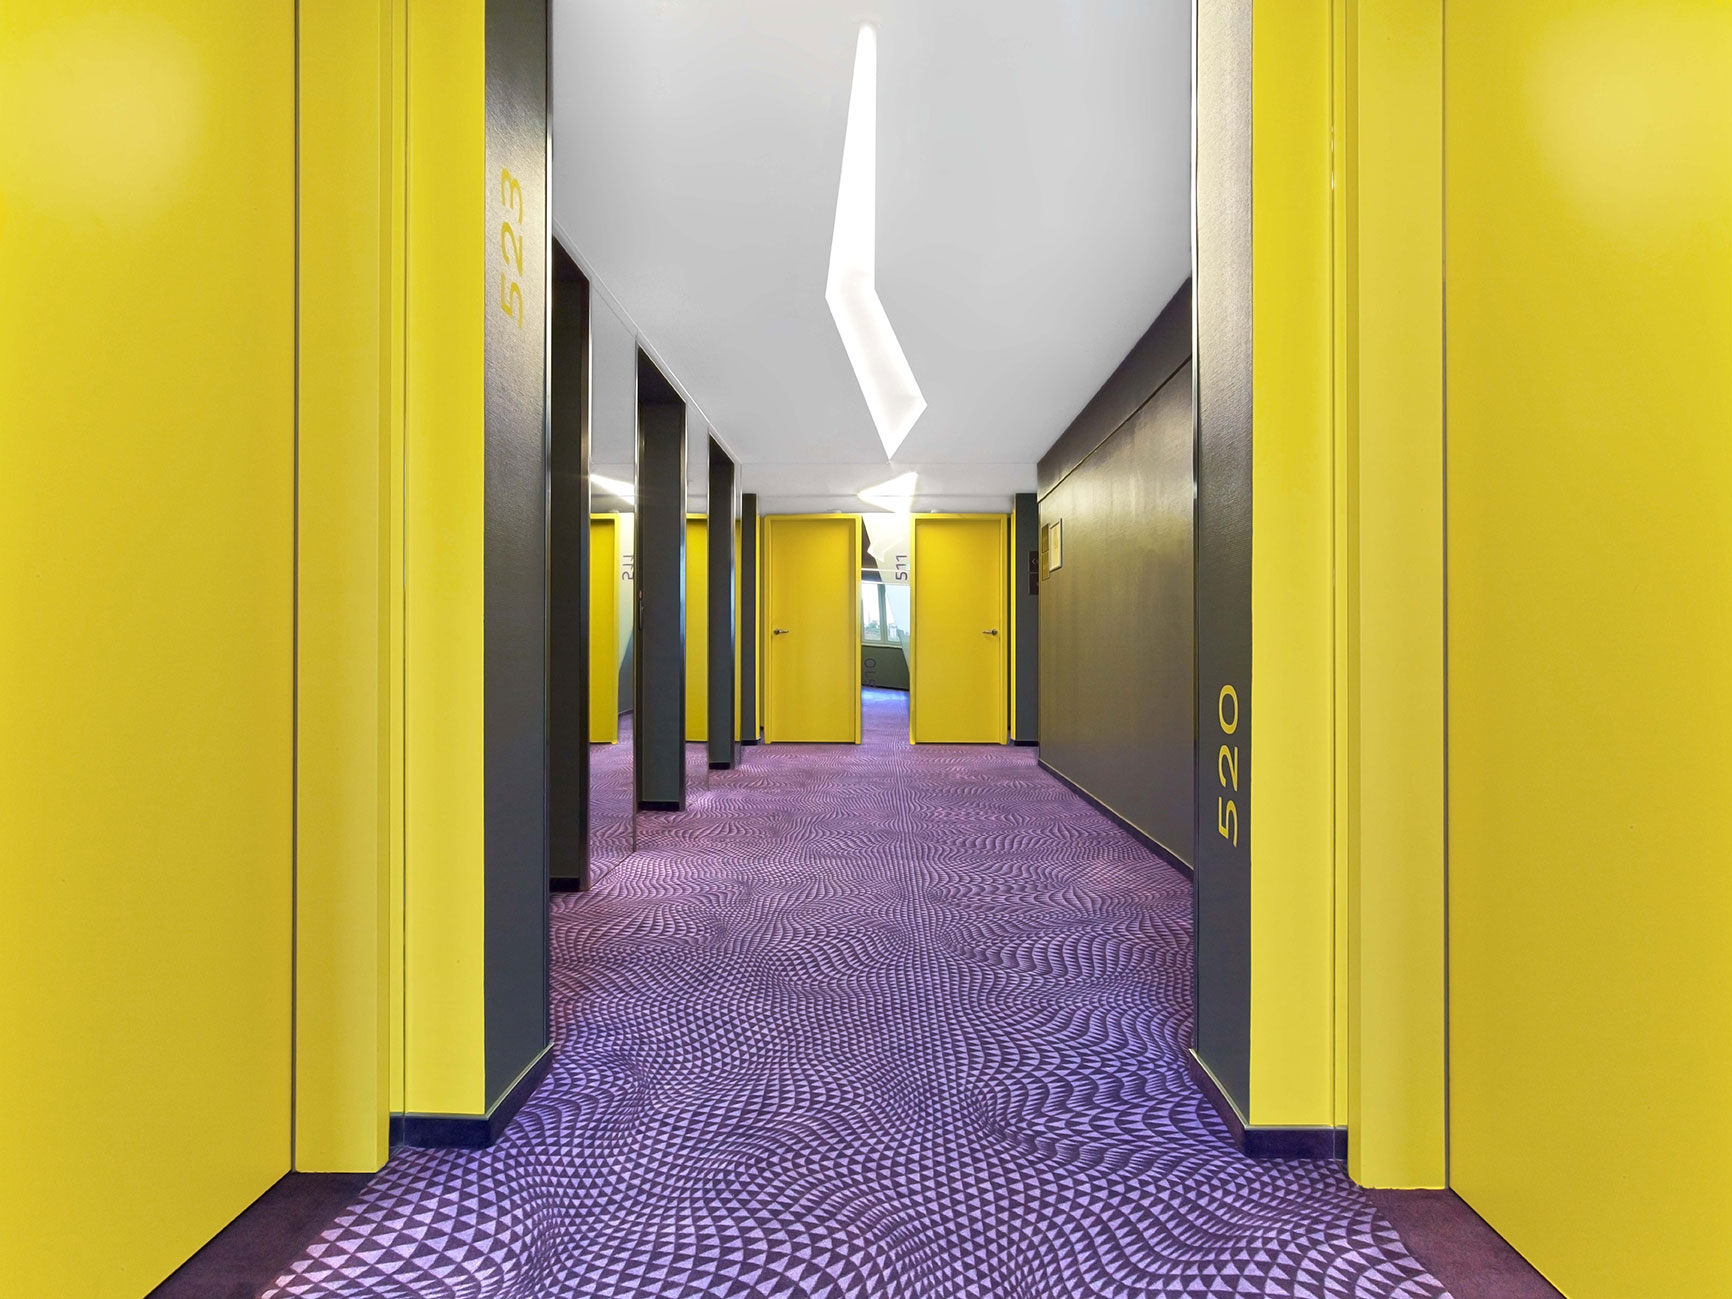 Hallway at prizeotel Hanover-City with yellow door frames and a purple-pattern floor